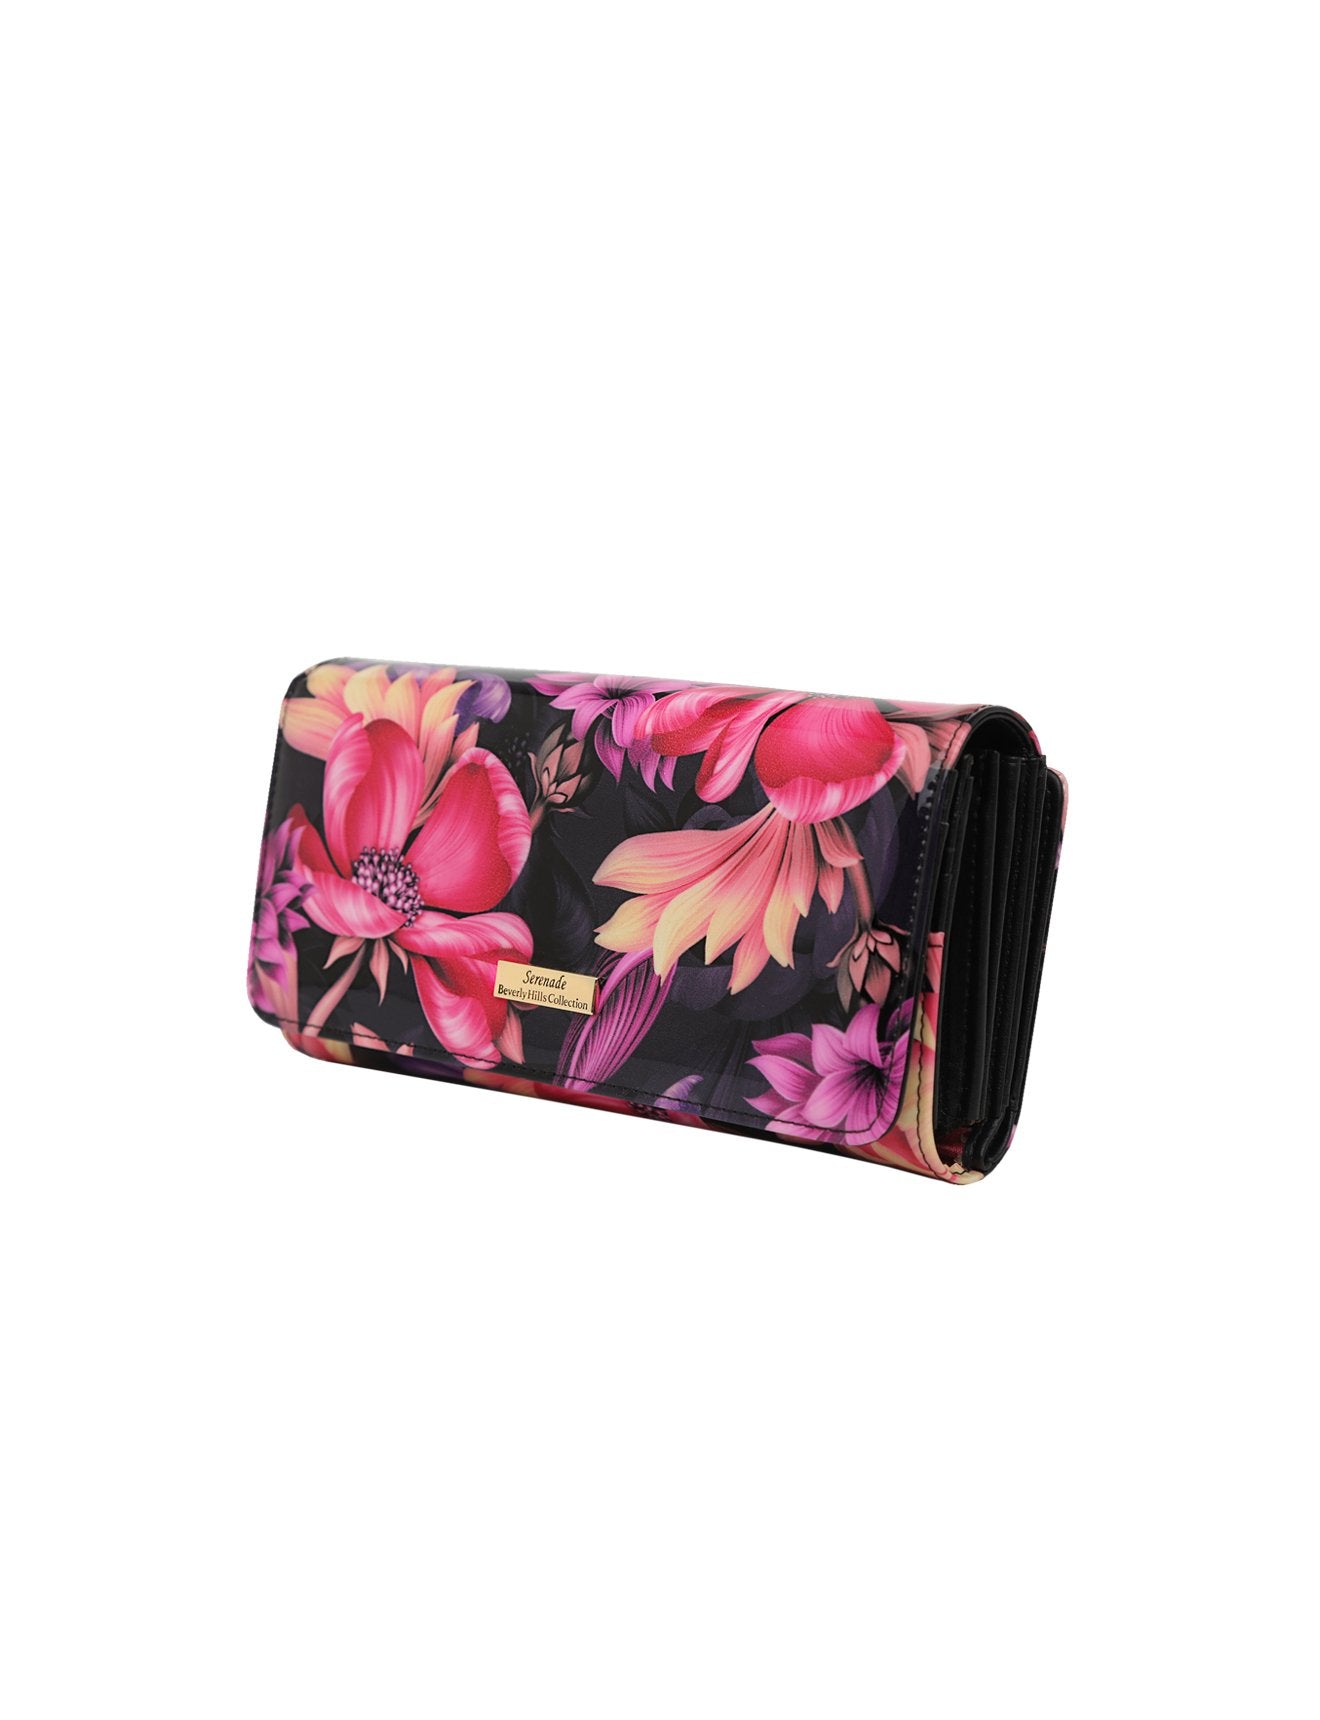 Serenade - Cynthia WSN-2601 RFID Protected Large Leather Wallet - Floral - 0